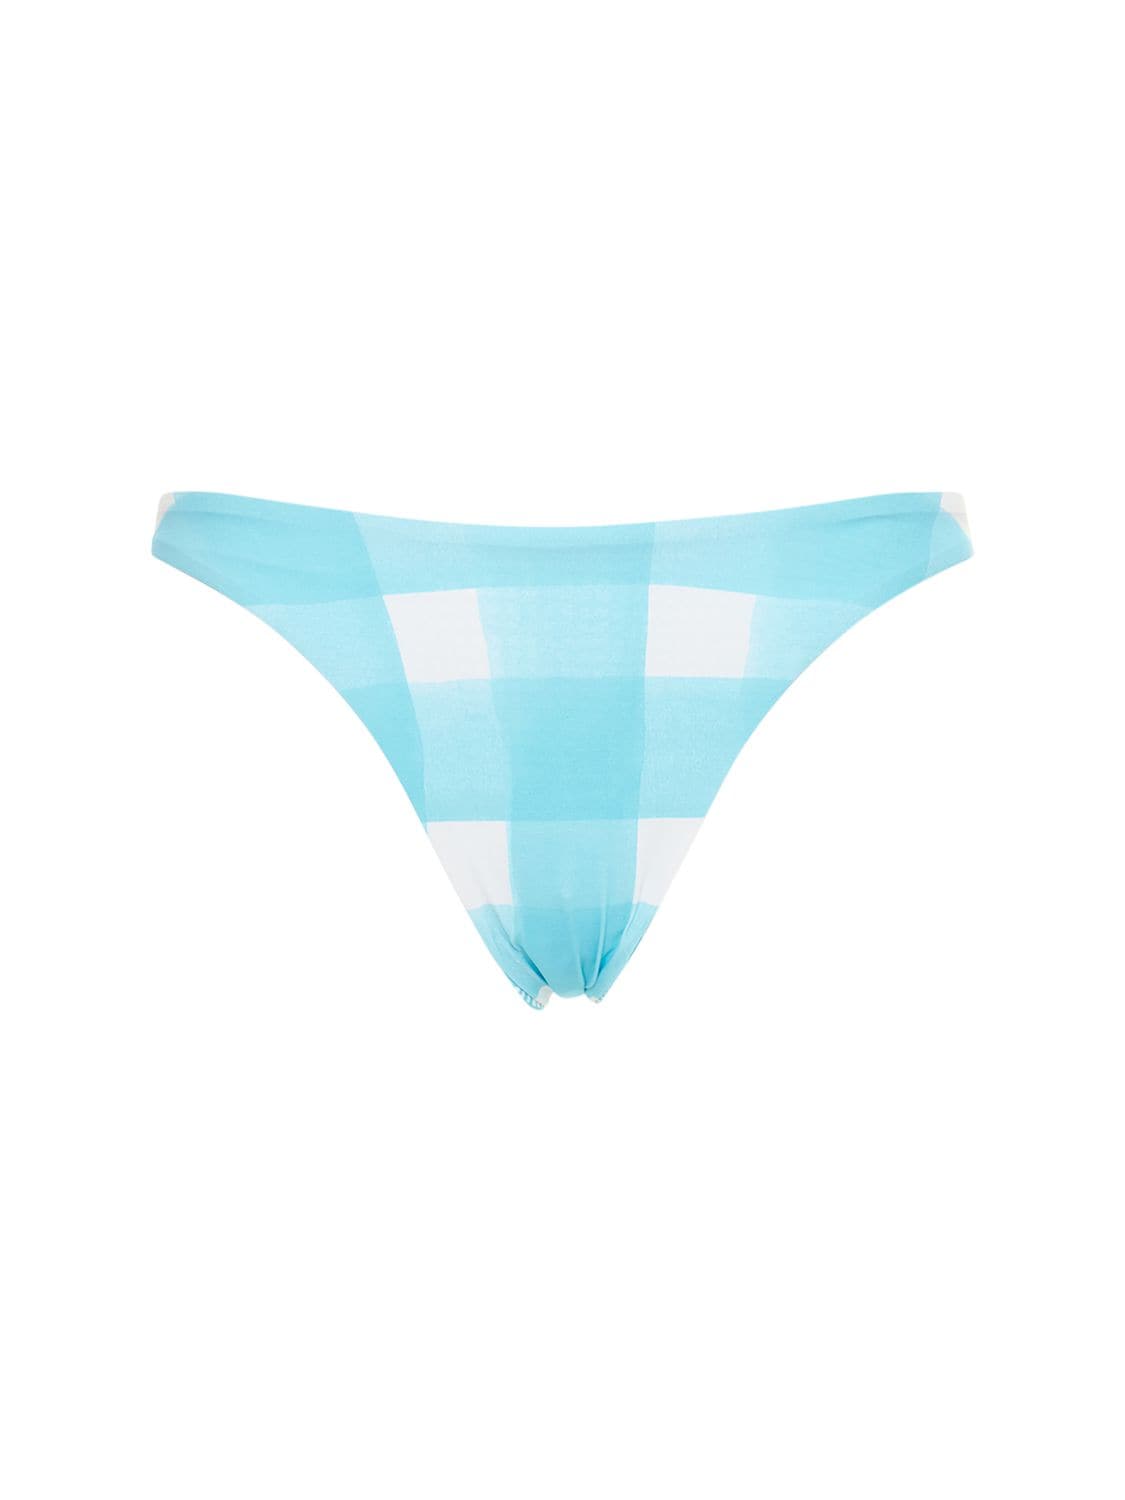 SOLID & STRIPED THE ANNABELLE REVERSIBLE BIKINI BOTTOMS